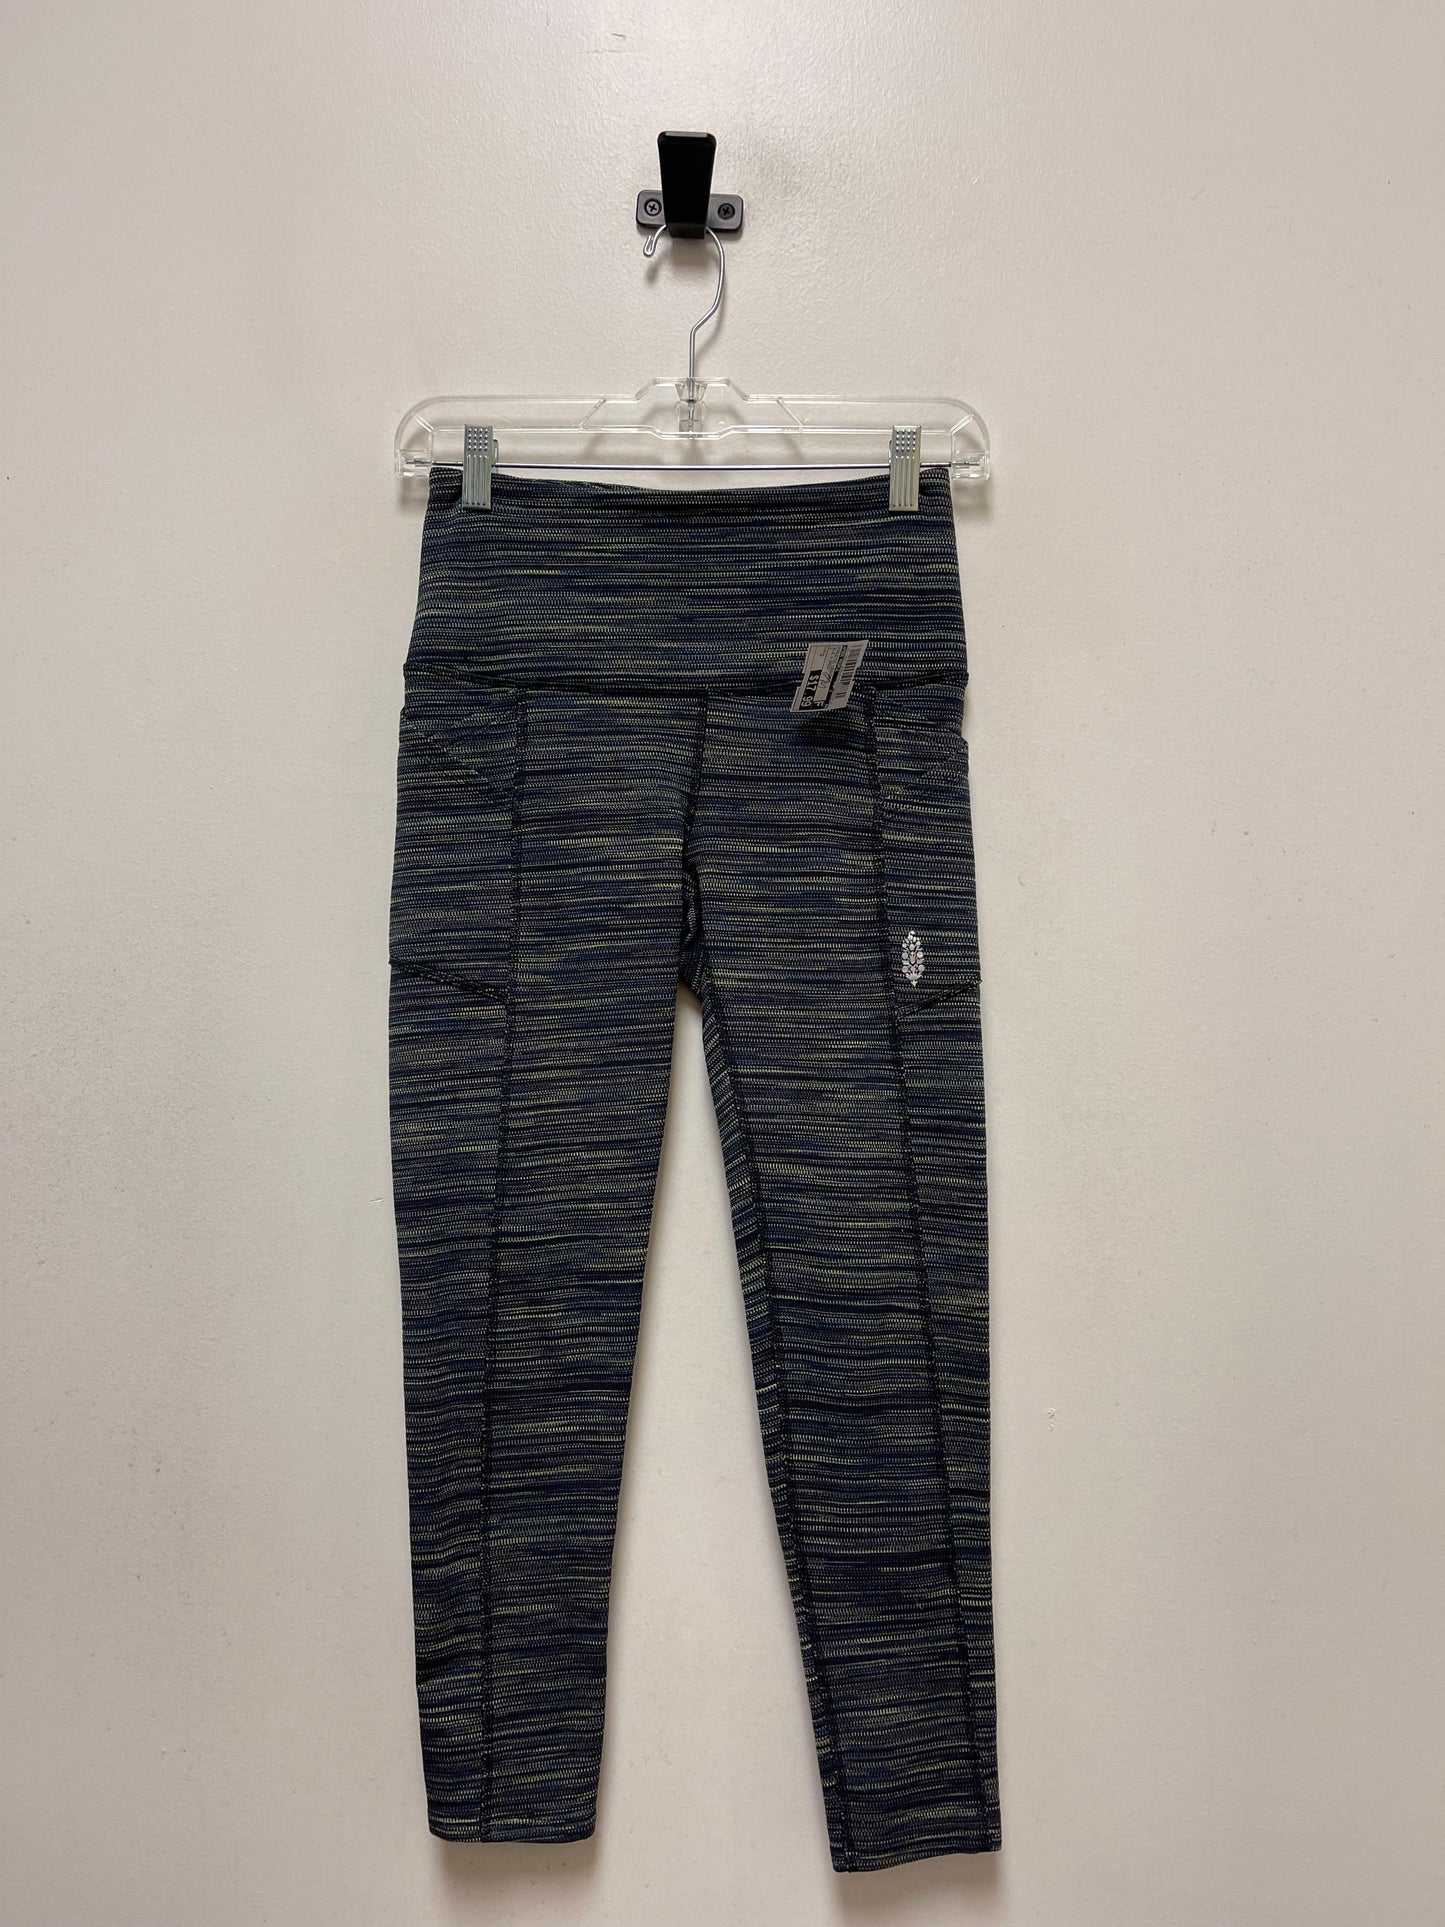 Blue & Green Athletic Leggings Free People, Size S